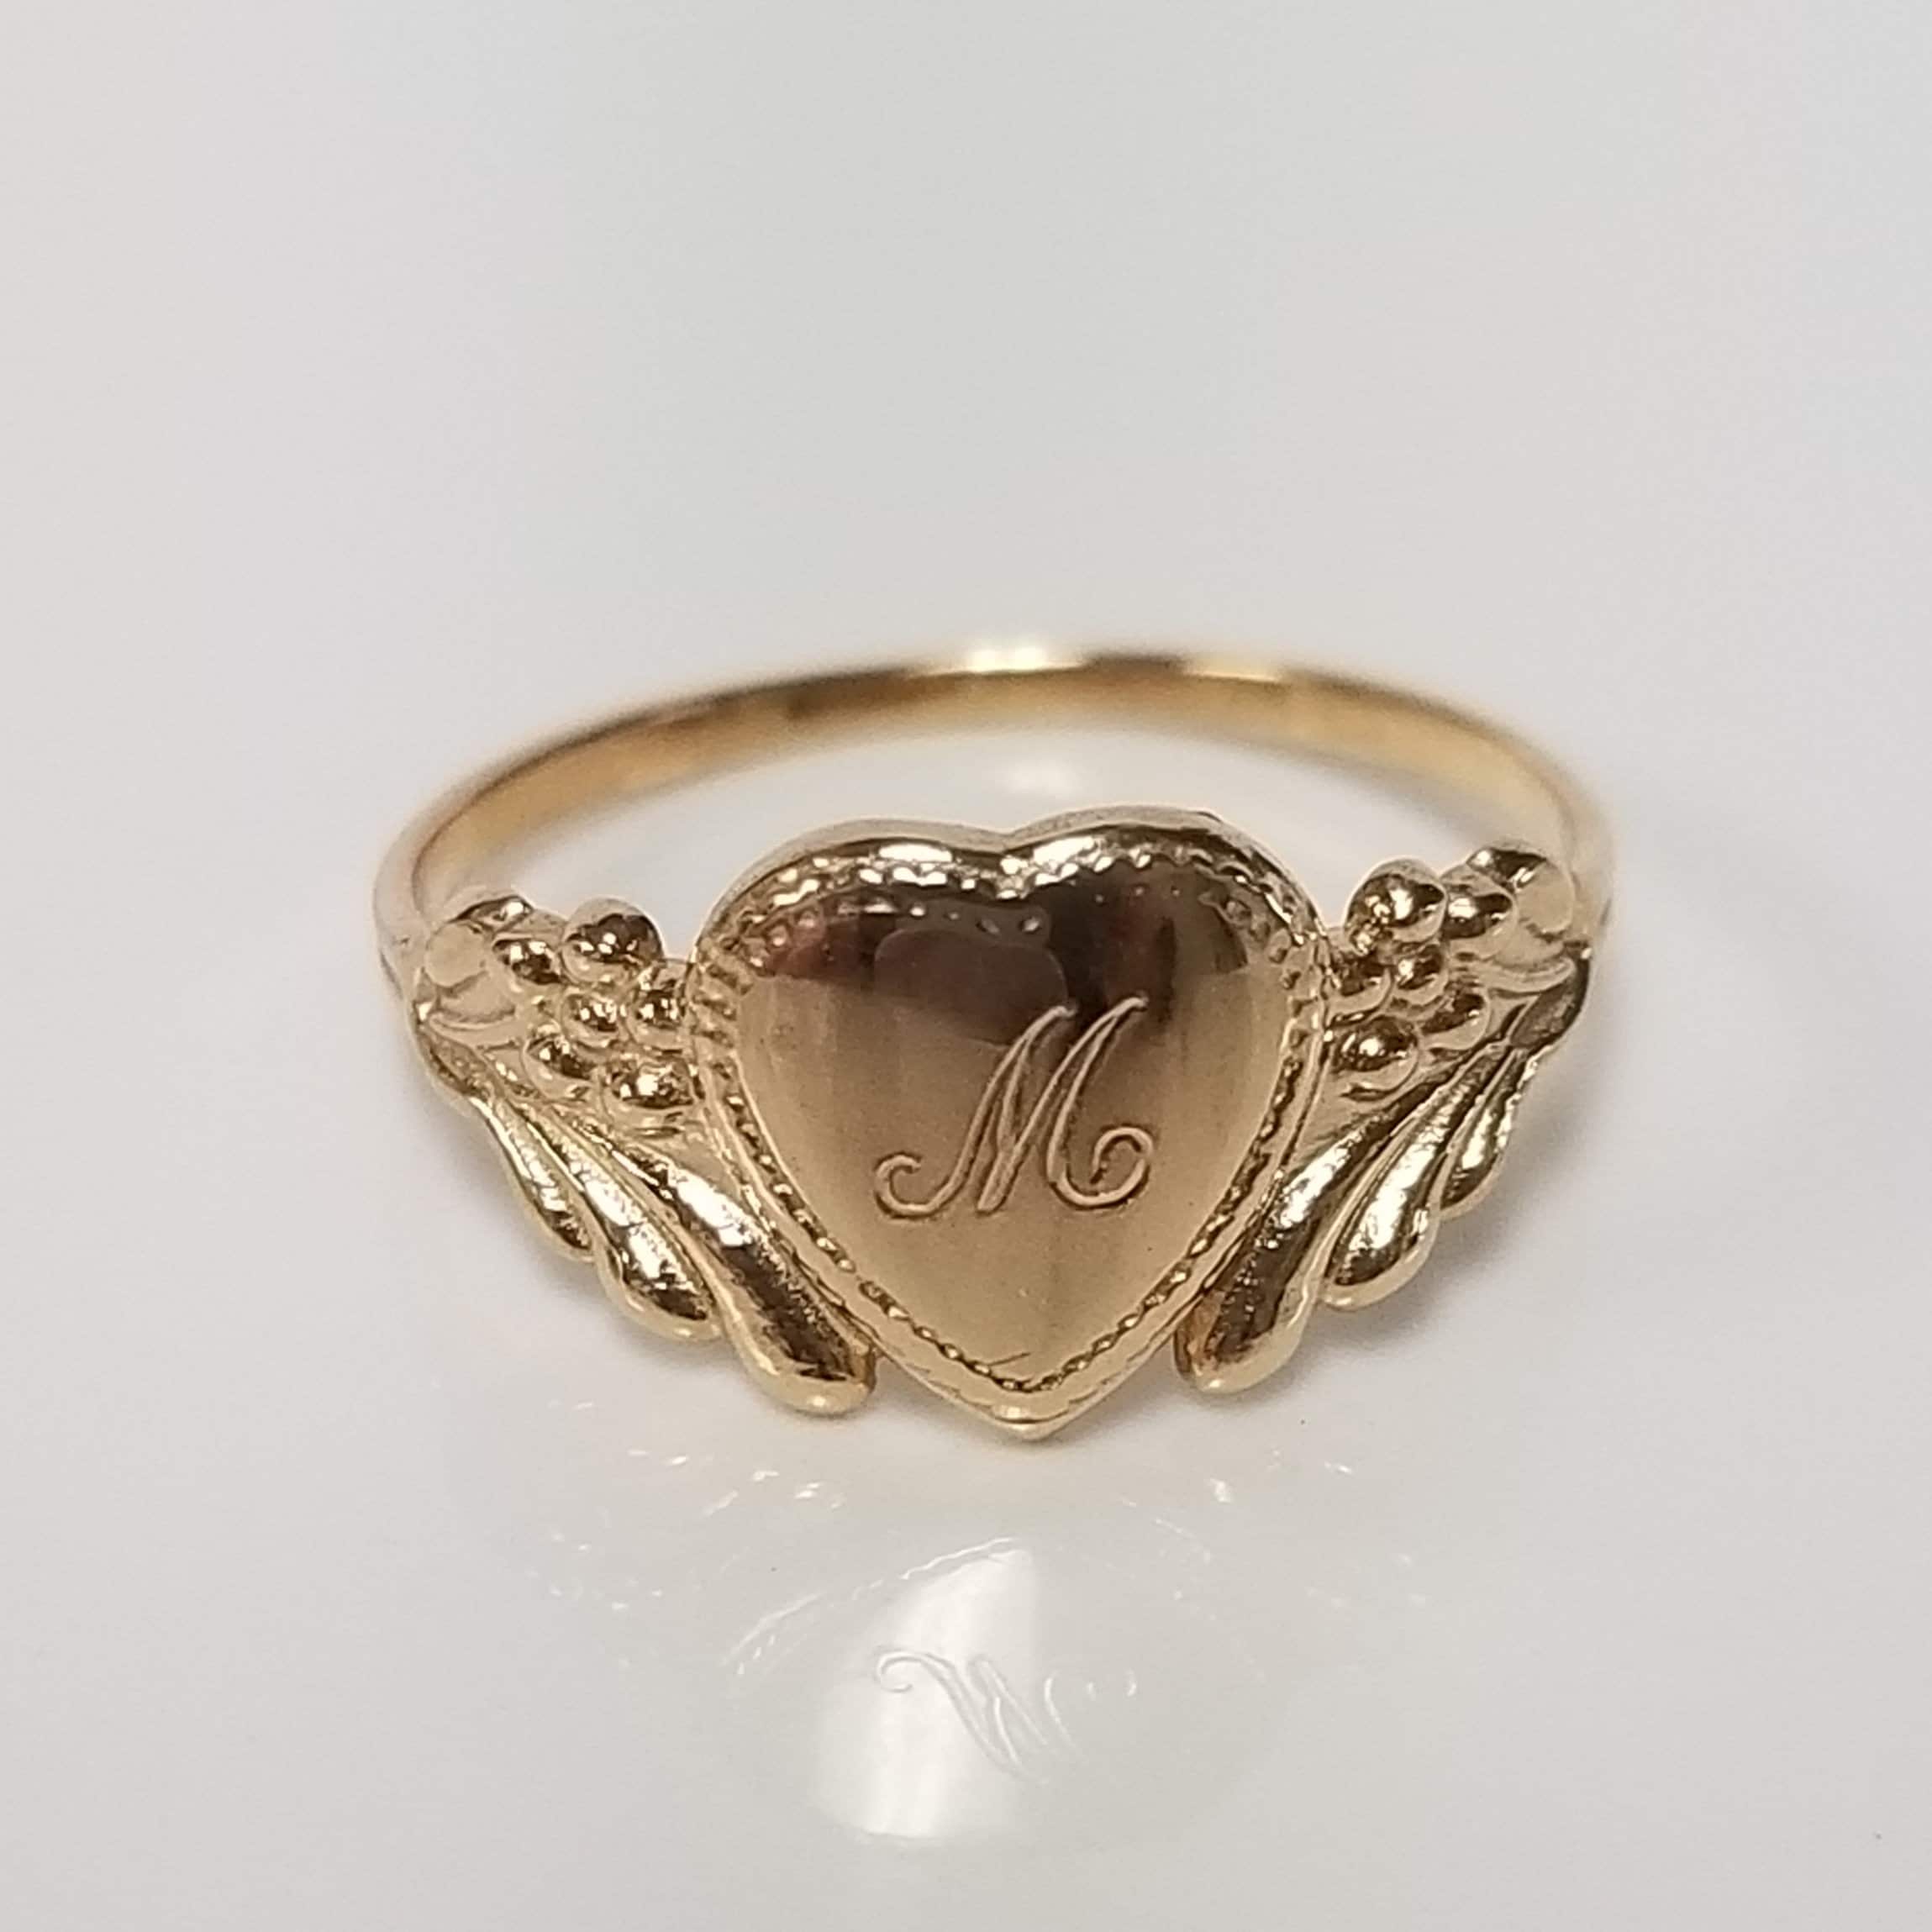 Sold at Auction: Tested 10K Yellow Gold and Diamond 